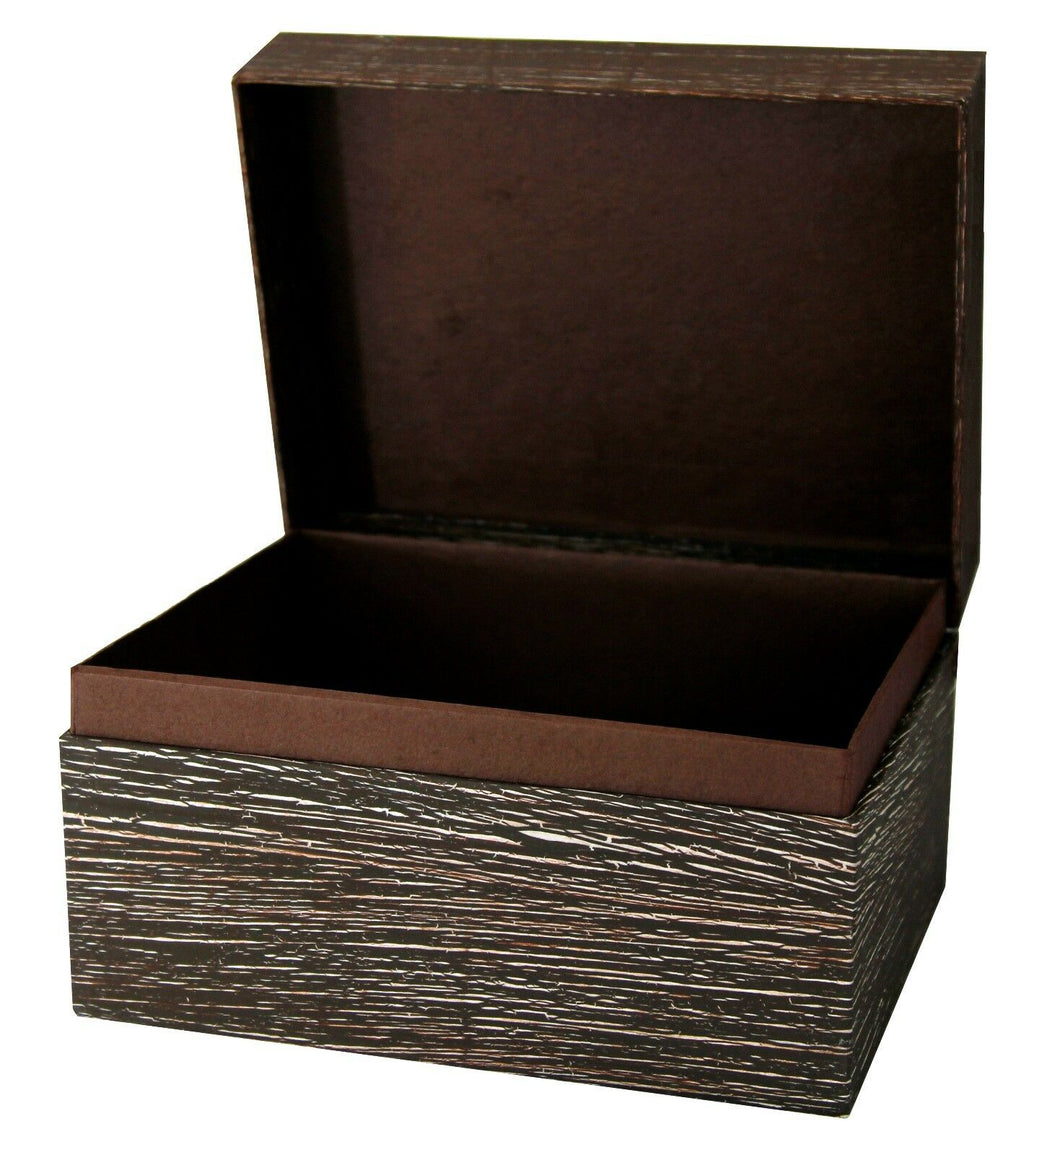 Large/Adult 220 Cubic Inch Antique Brown Chest Earthurn Cremation Urn For Ashes